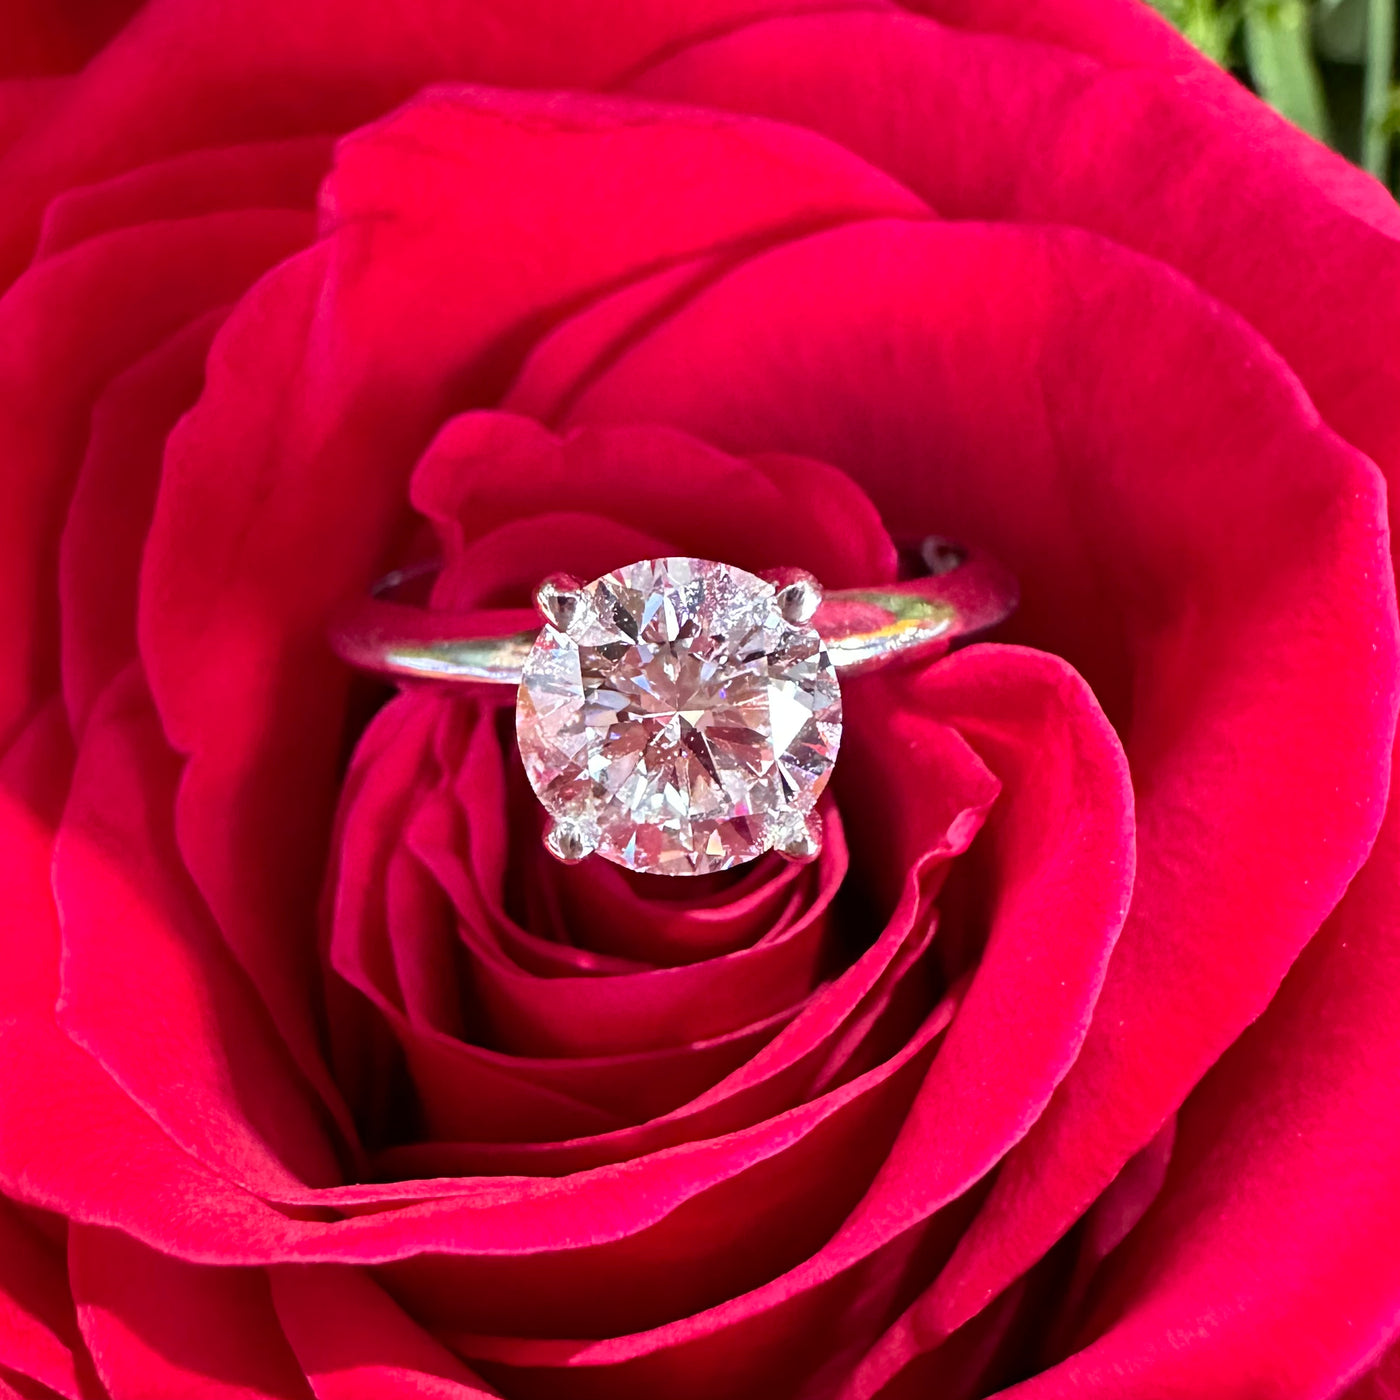 Apparel & Accessories > Jewelry > Rings 1.32 Carat Diamond Solitaire 14K White Gold Engagement Ring Pierce Custom Jewelers